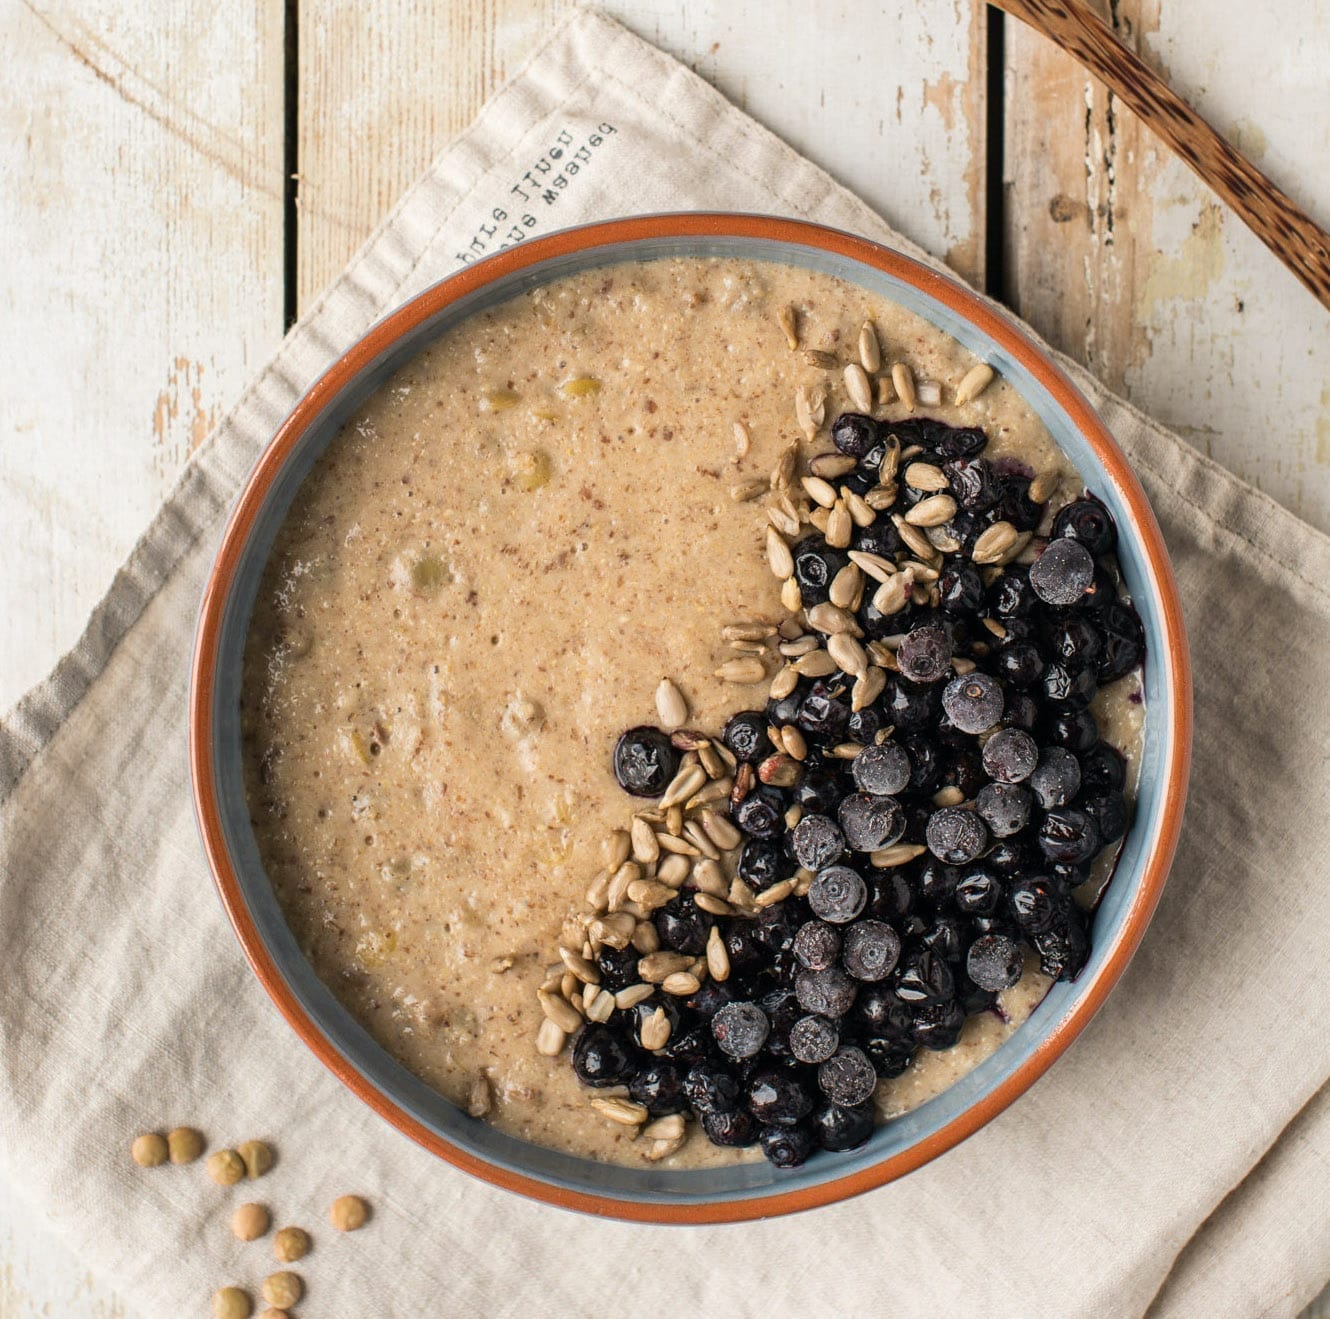 This vegan lentil oatmeal is a perfect low glycemic breakfast porridge recipe that will keep your blood sugar stable.